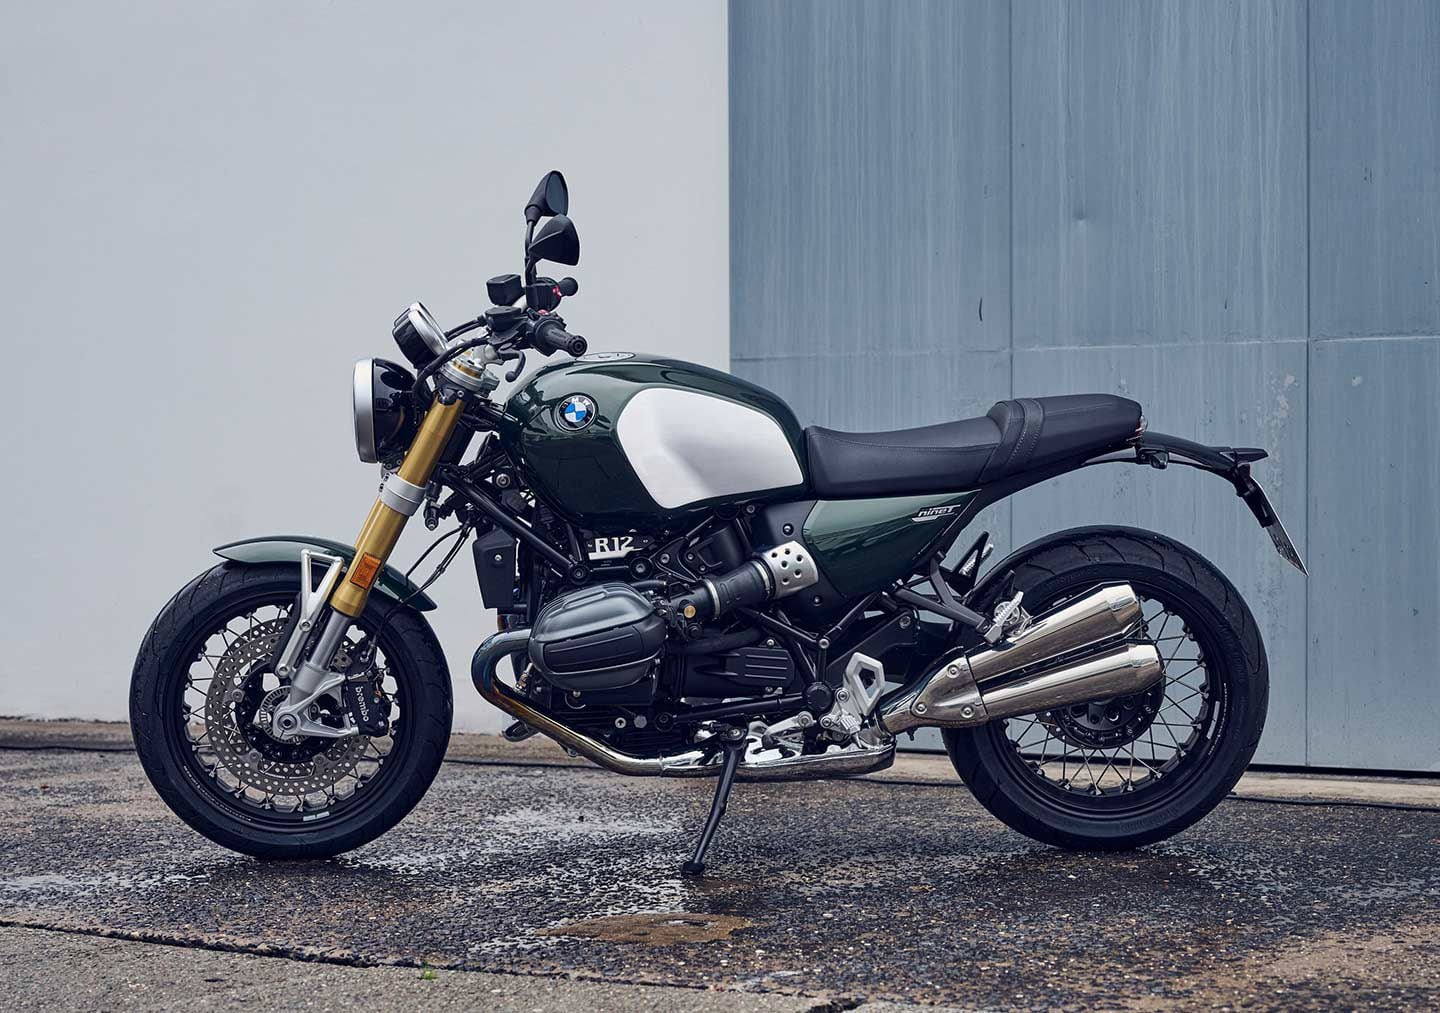 Although it also gets the new one-piece frame, the sportier R 12 nineT inherits most of its predecessor’s streetwise attitude, with more power, 17-inch wheels, and a taller seat than the R 12.